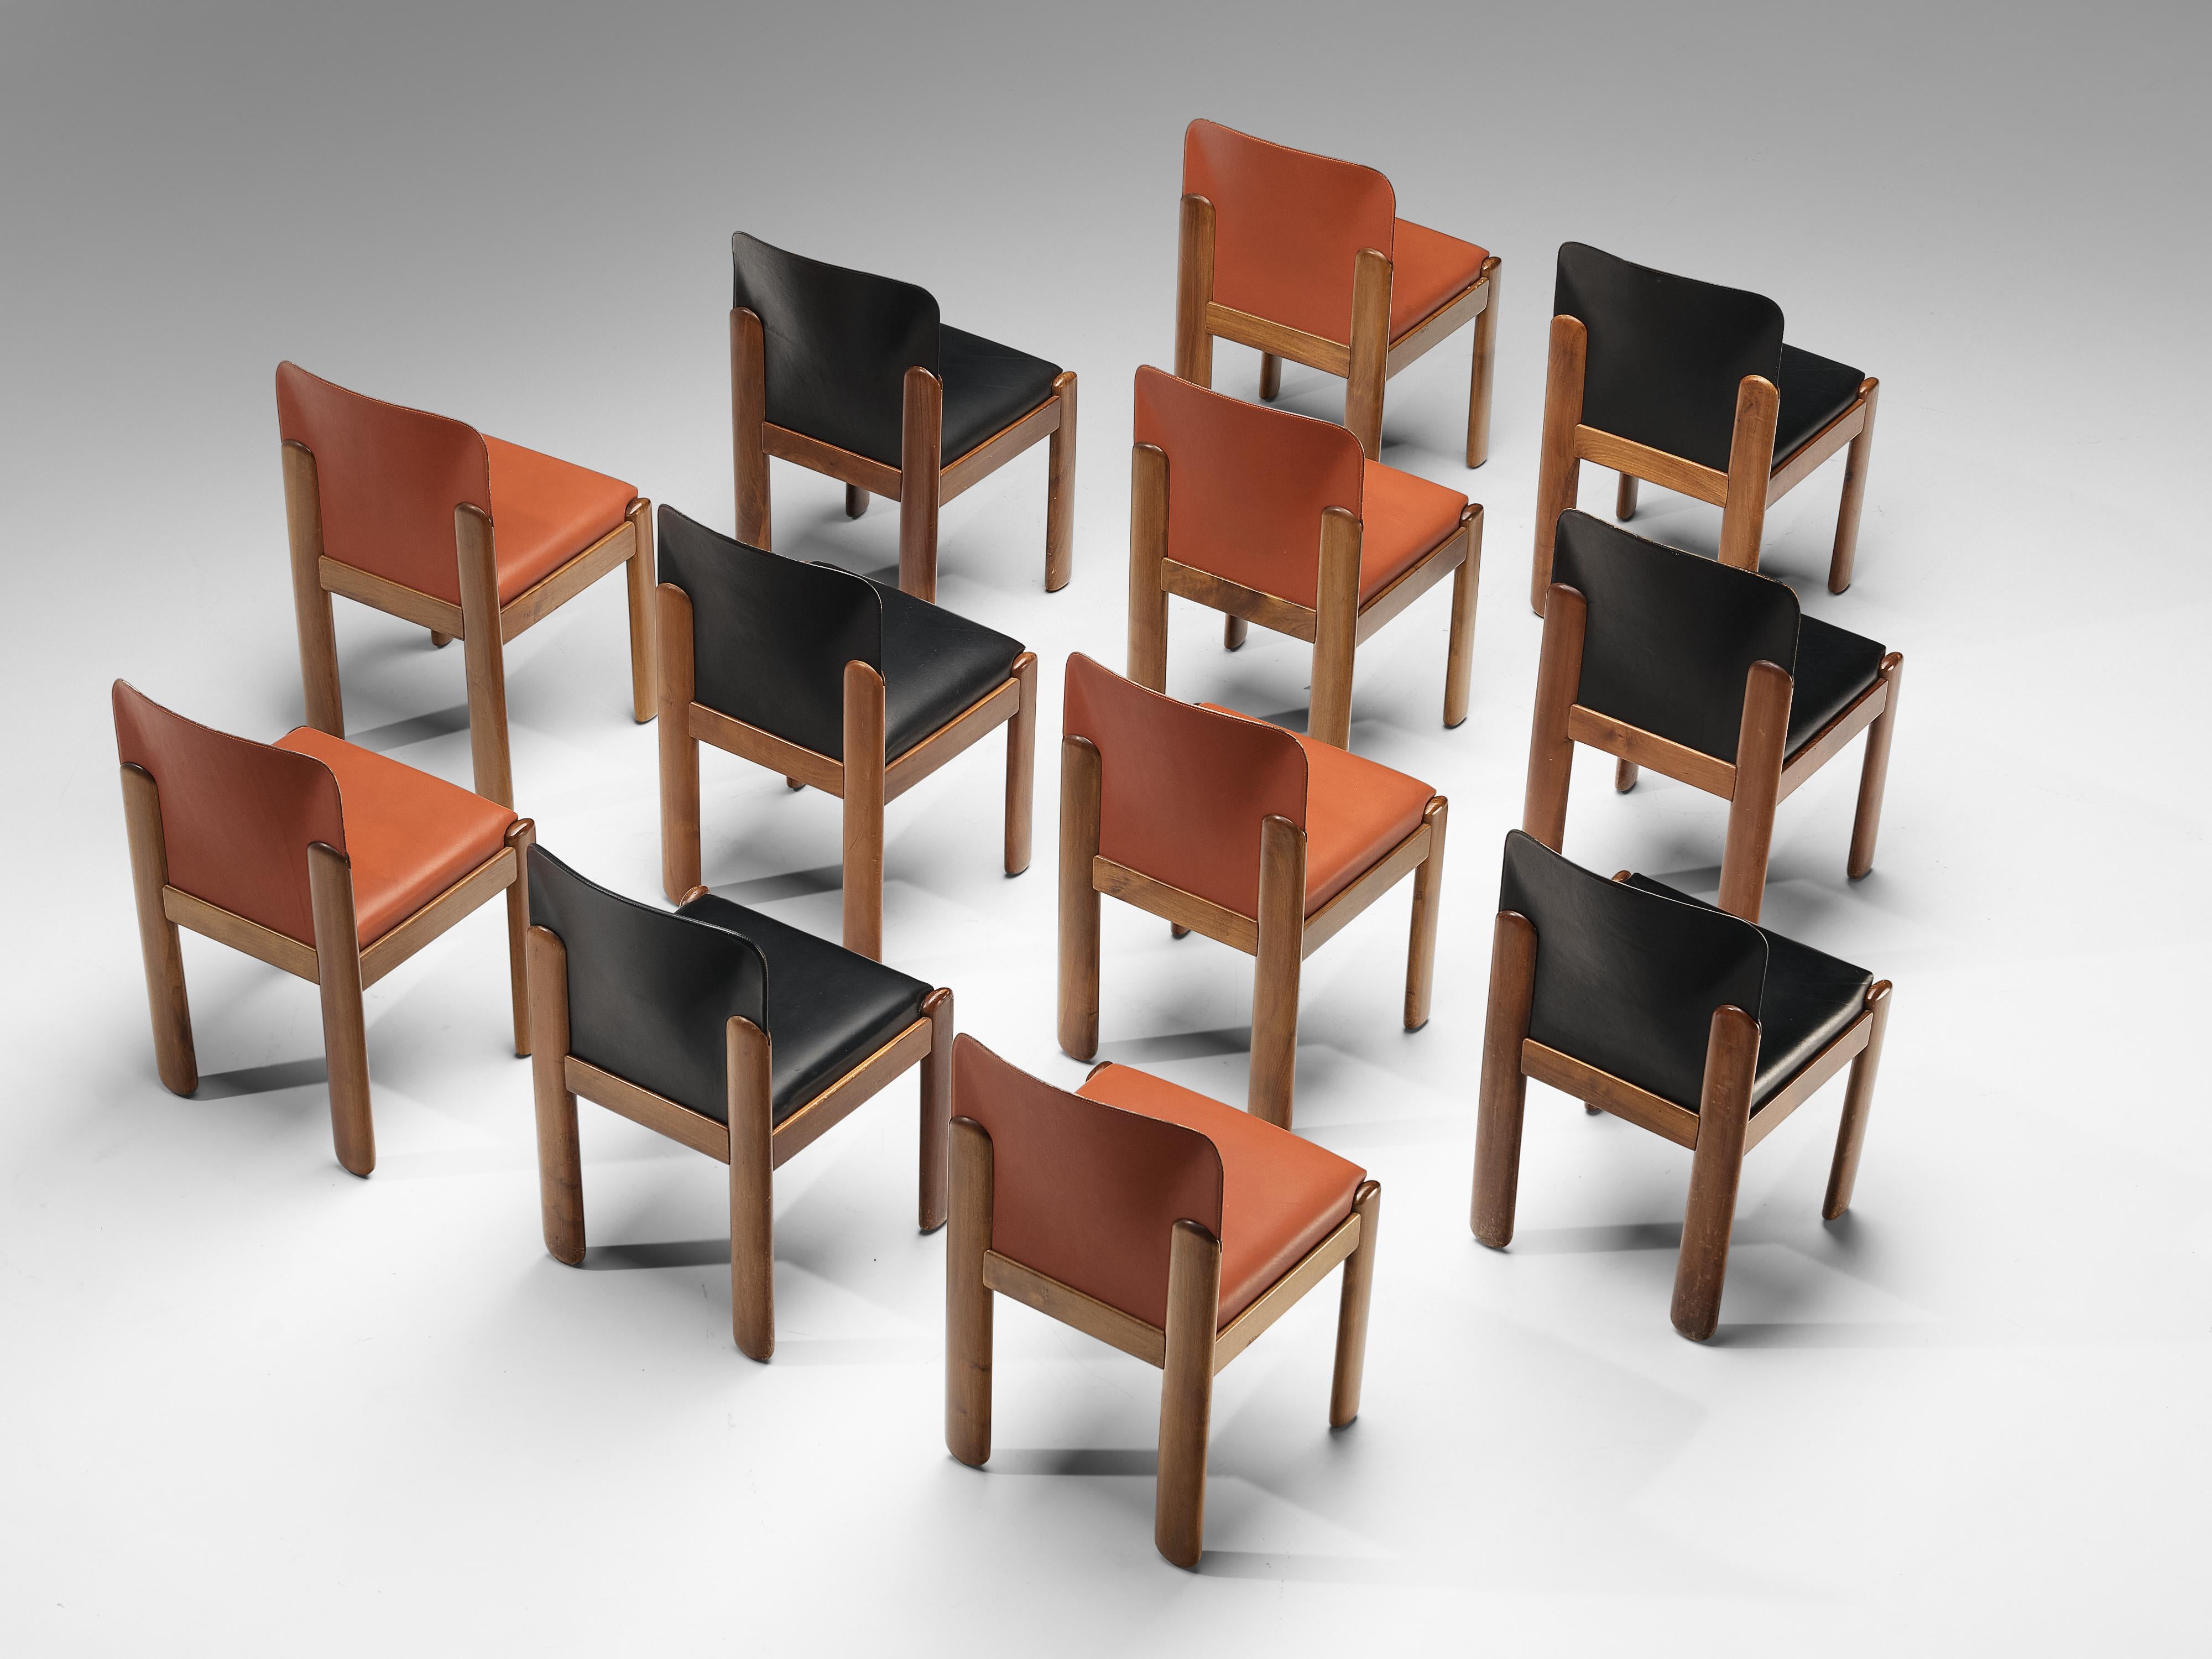 Silvio Coppola for Bernini, 12 dining chairs model 330, red and black leather, stained beech, Italy, 1960s

Wonderful set of 12 dining chairs by Italian designer Silvio Coppola. These aesthetically well balanced chairs strongly convince with the